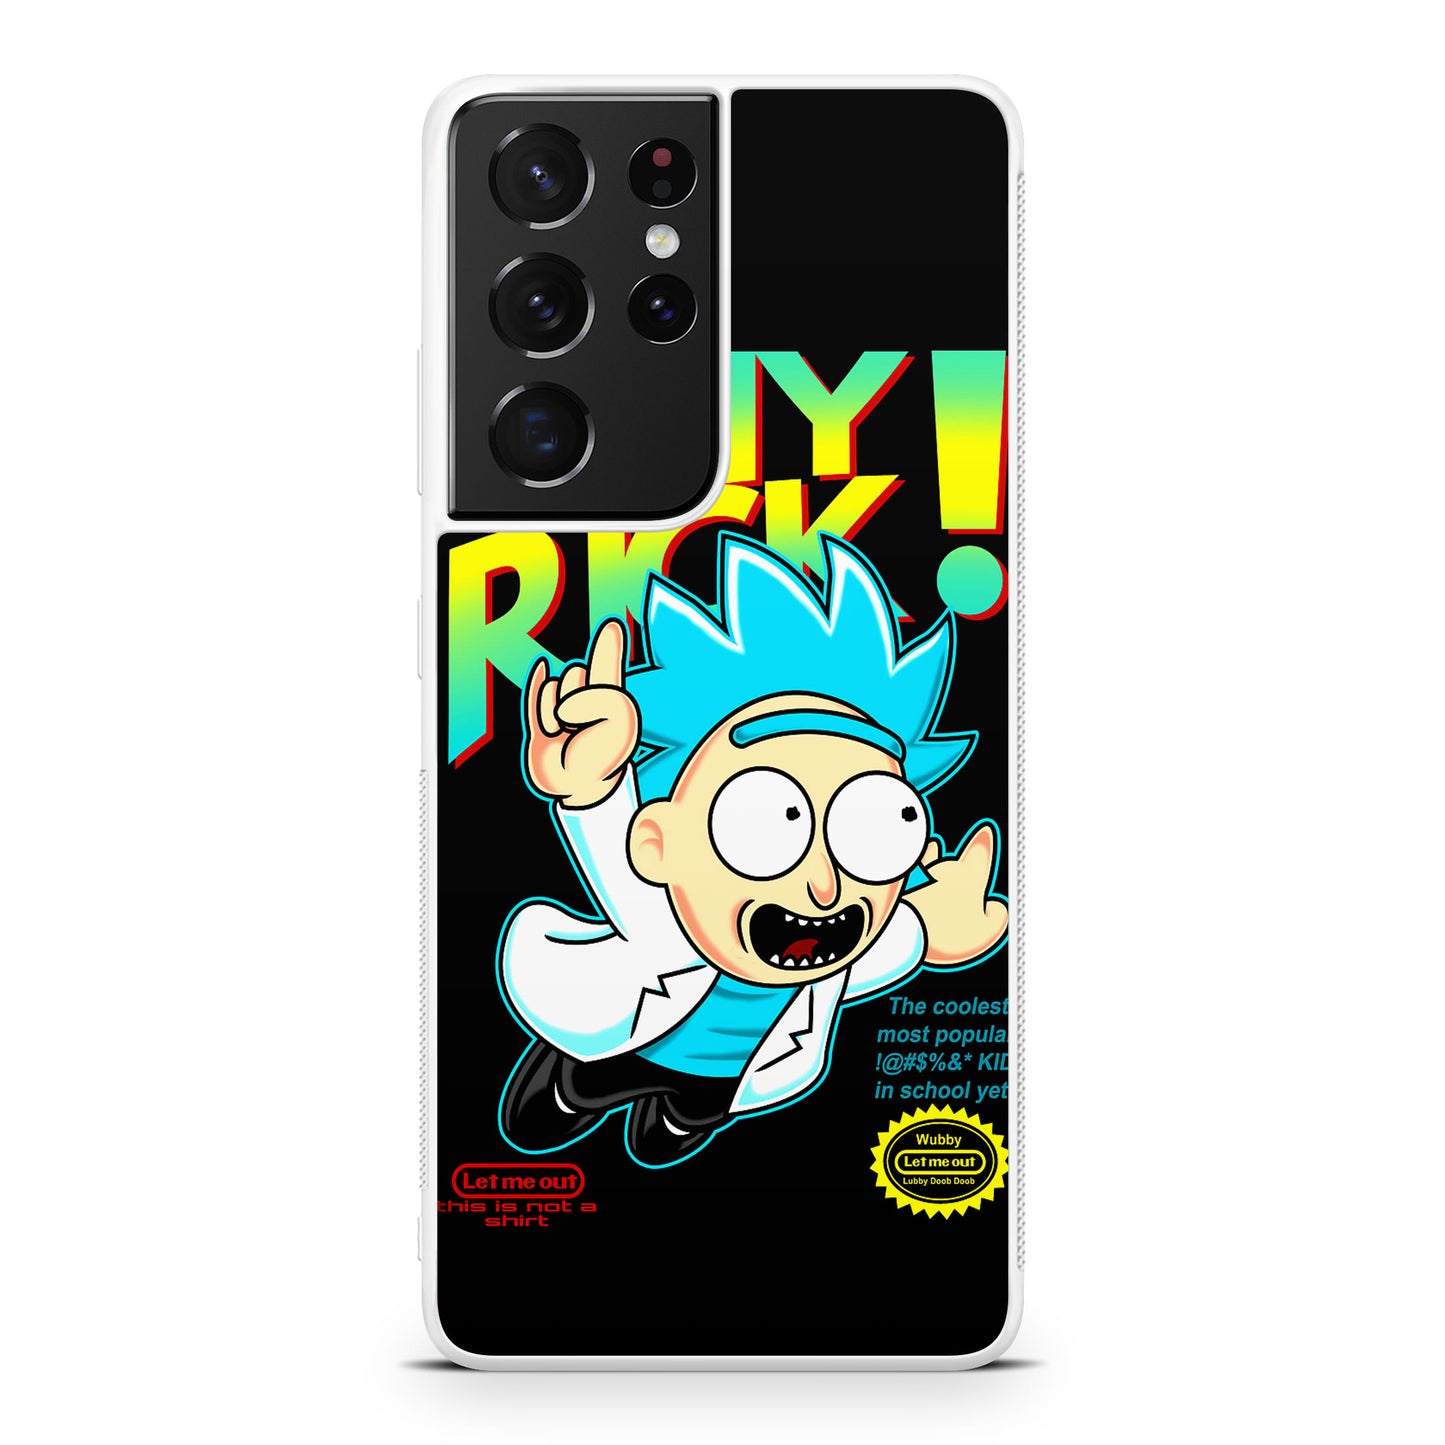 Tiny Rick Let Me Out Galaxy S21 Ultra Case